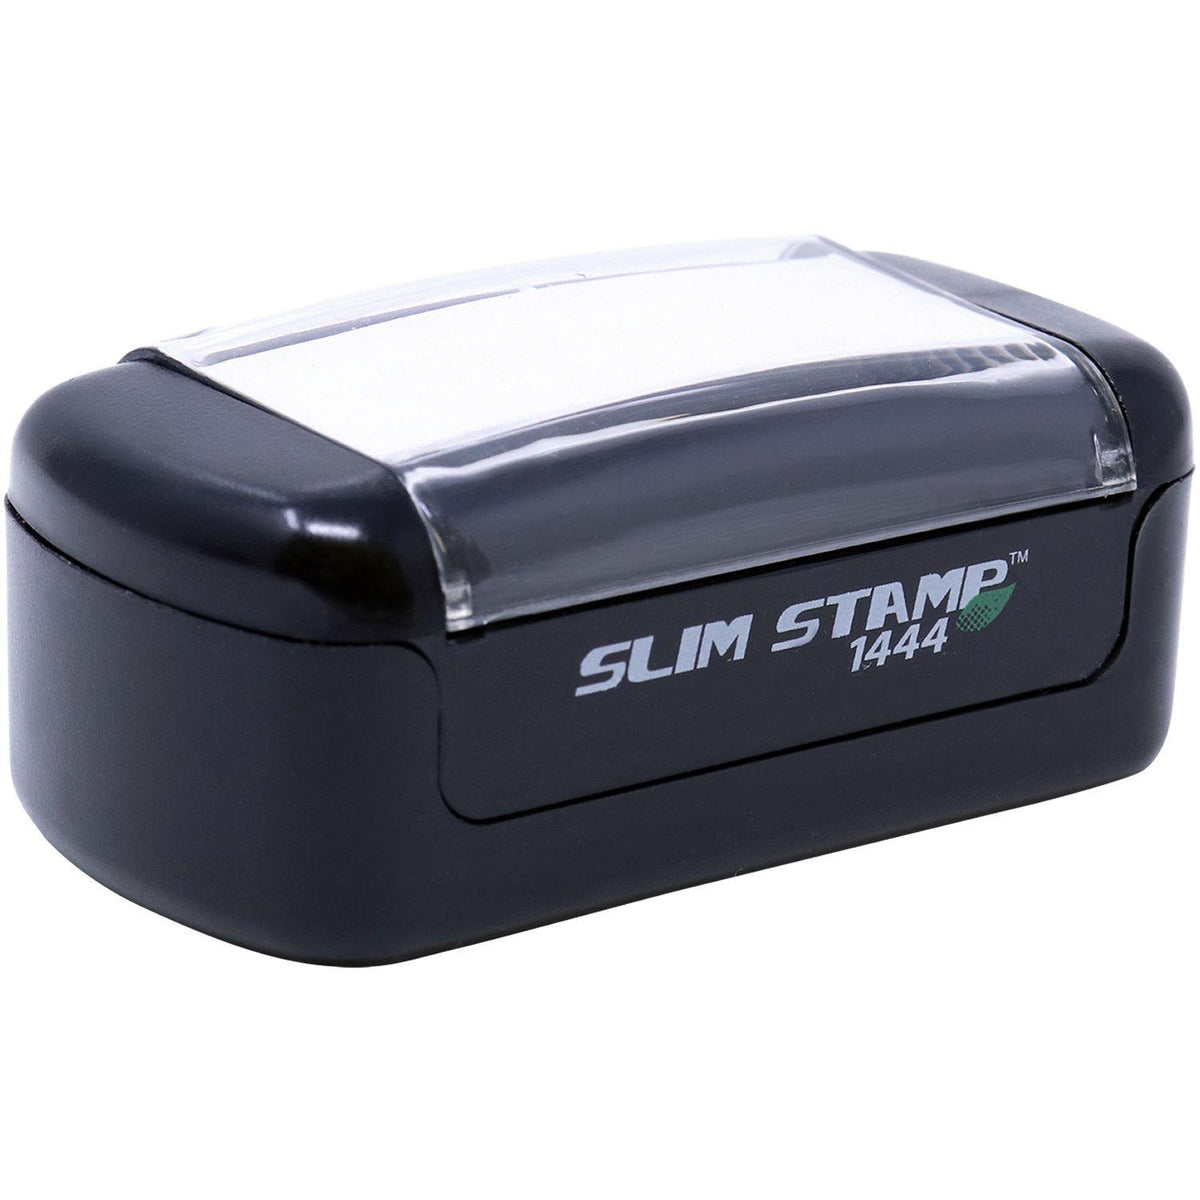 Alt View of Slim Pre Inked Validate Only Stamp Mount Angle